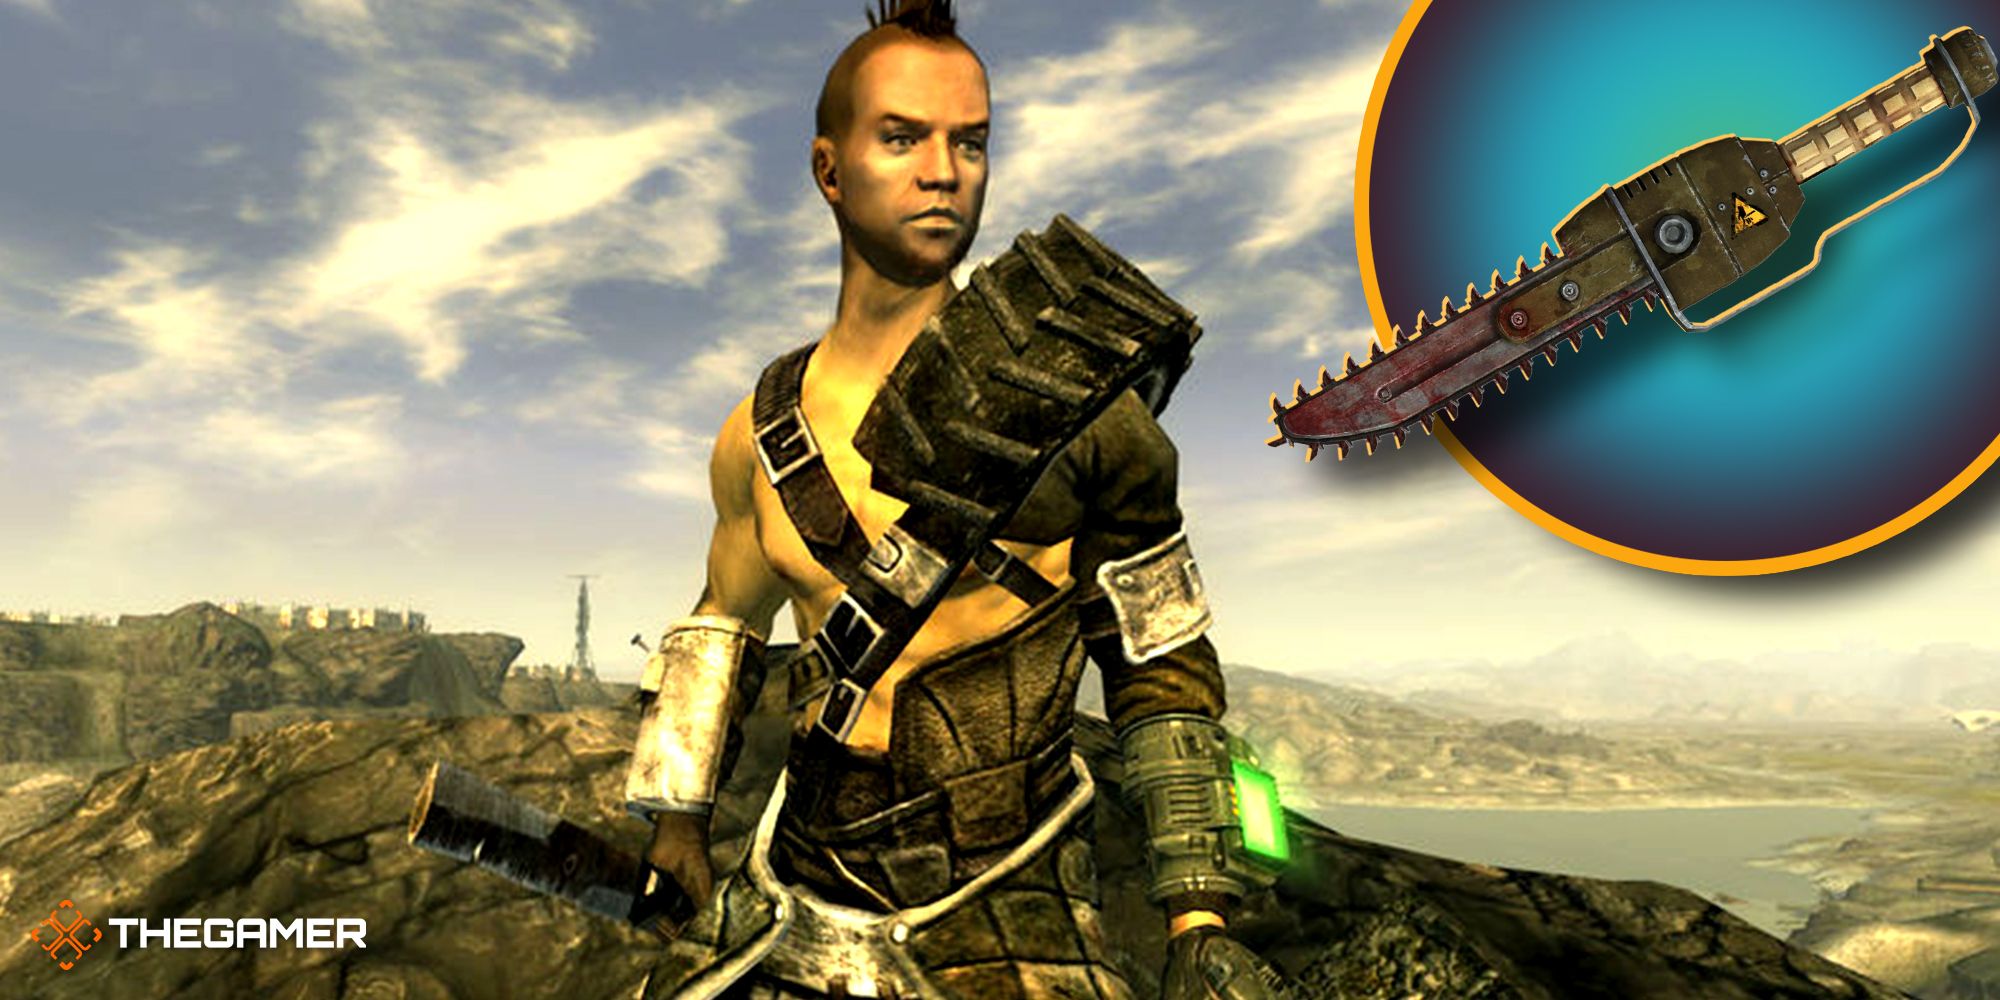 Fallout: New Vegas System Requirements